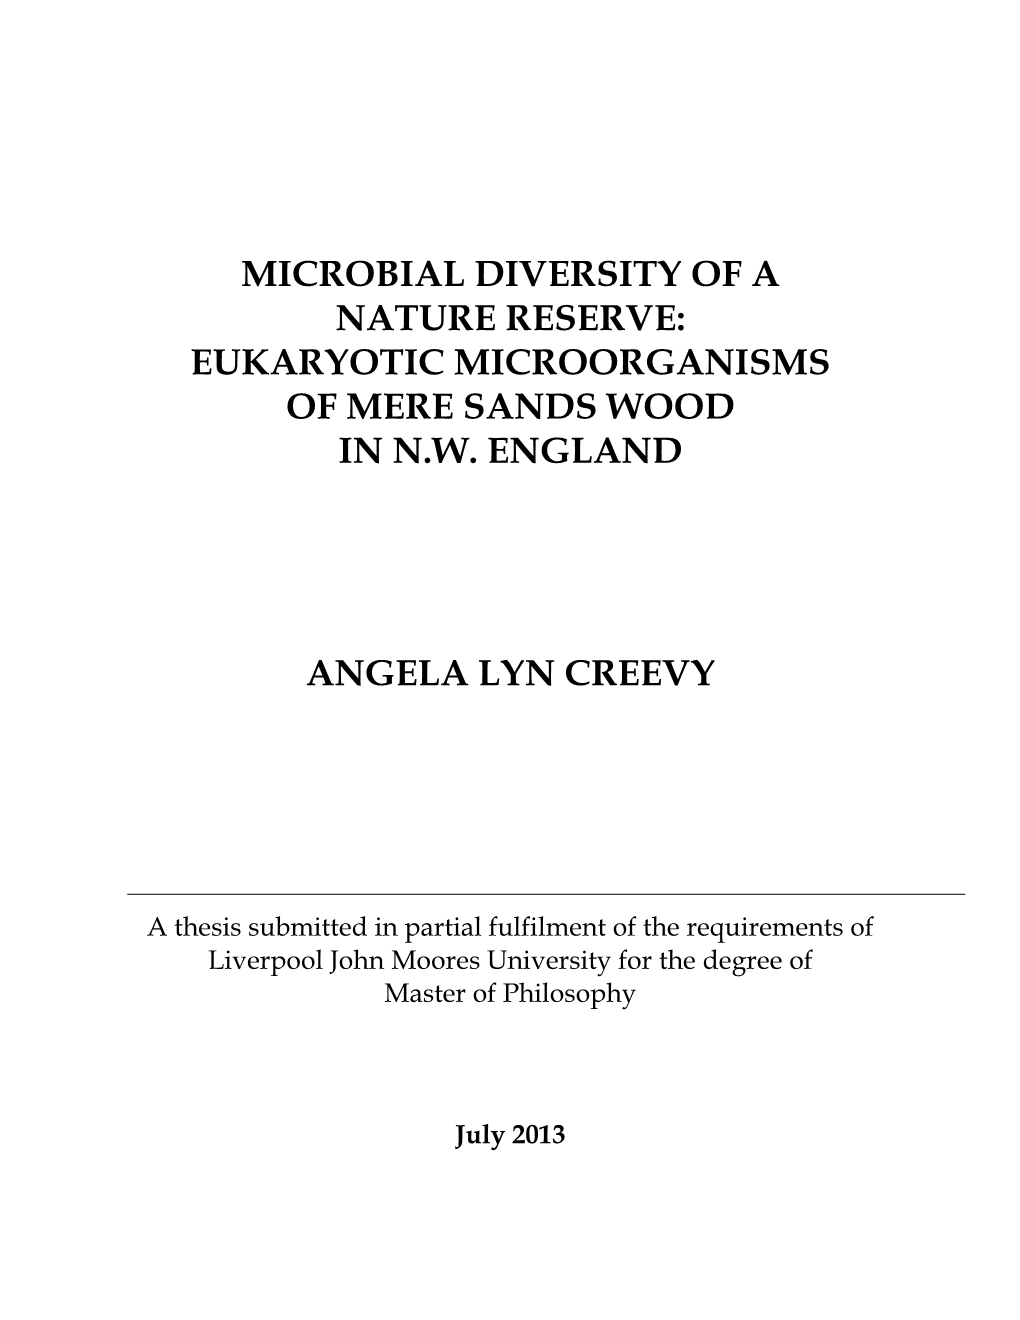 Microbial Diversity of a Nature Reserve: Eukaryotic Microorganisms of Mere Sands Wood in N.W. England Angela Lyn Creevy